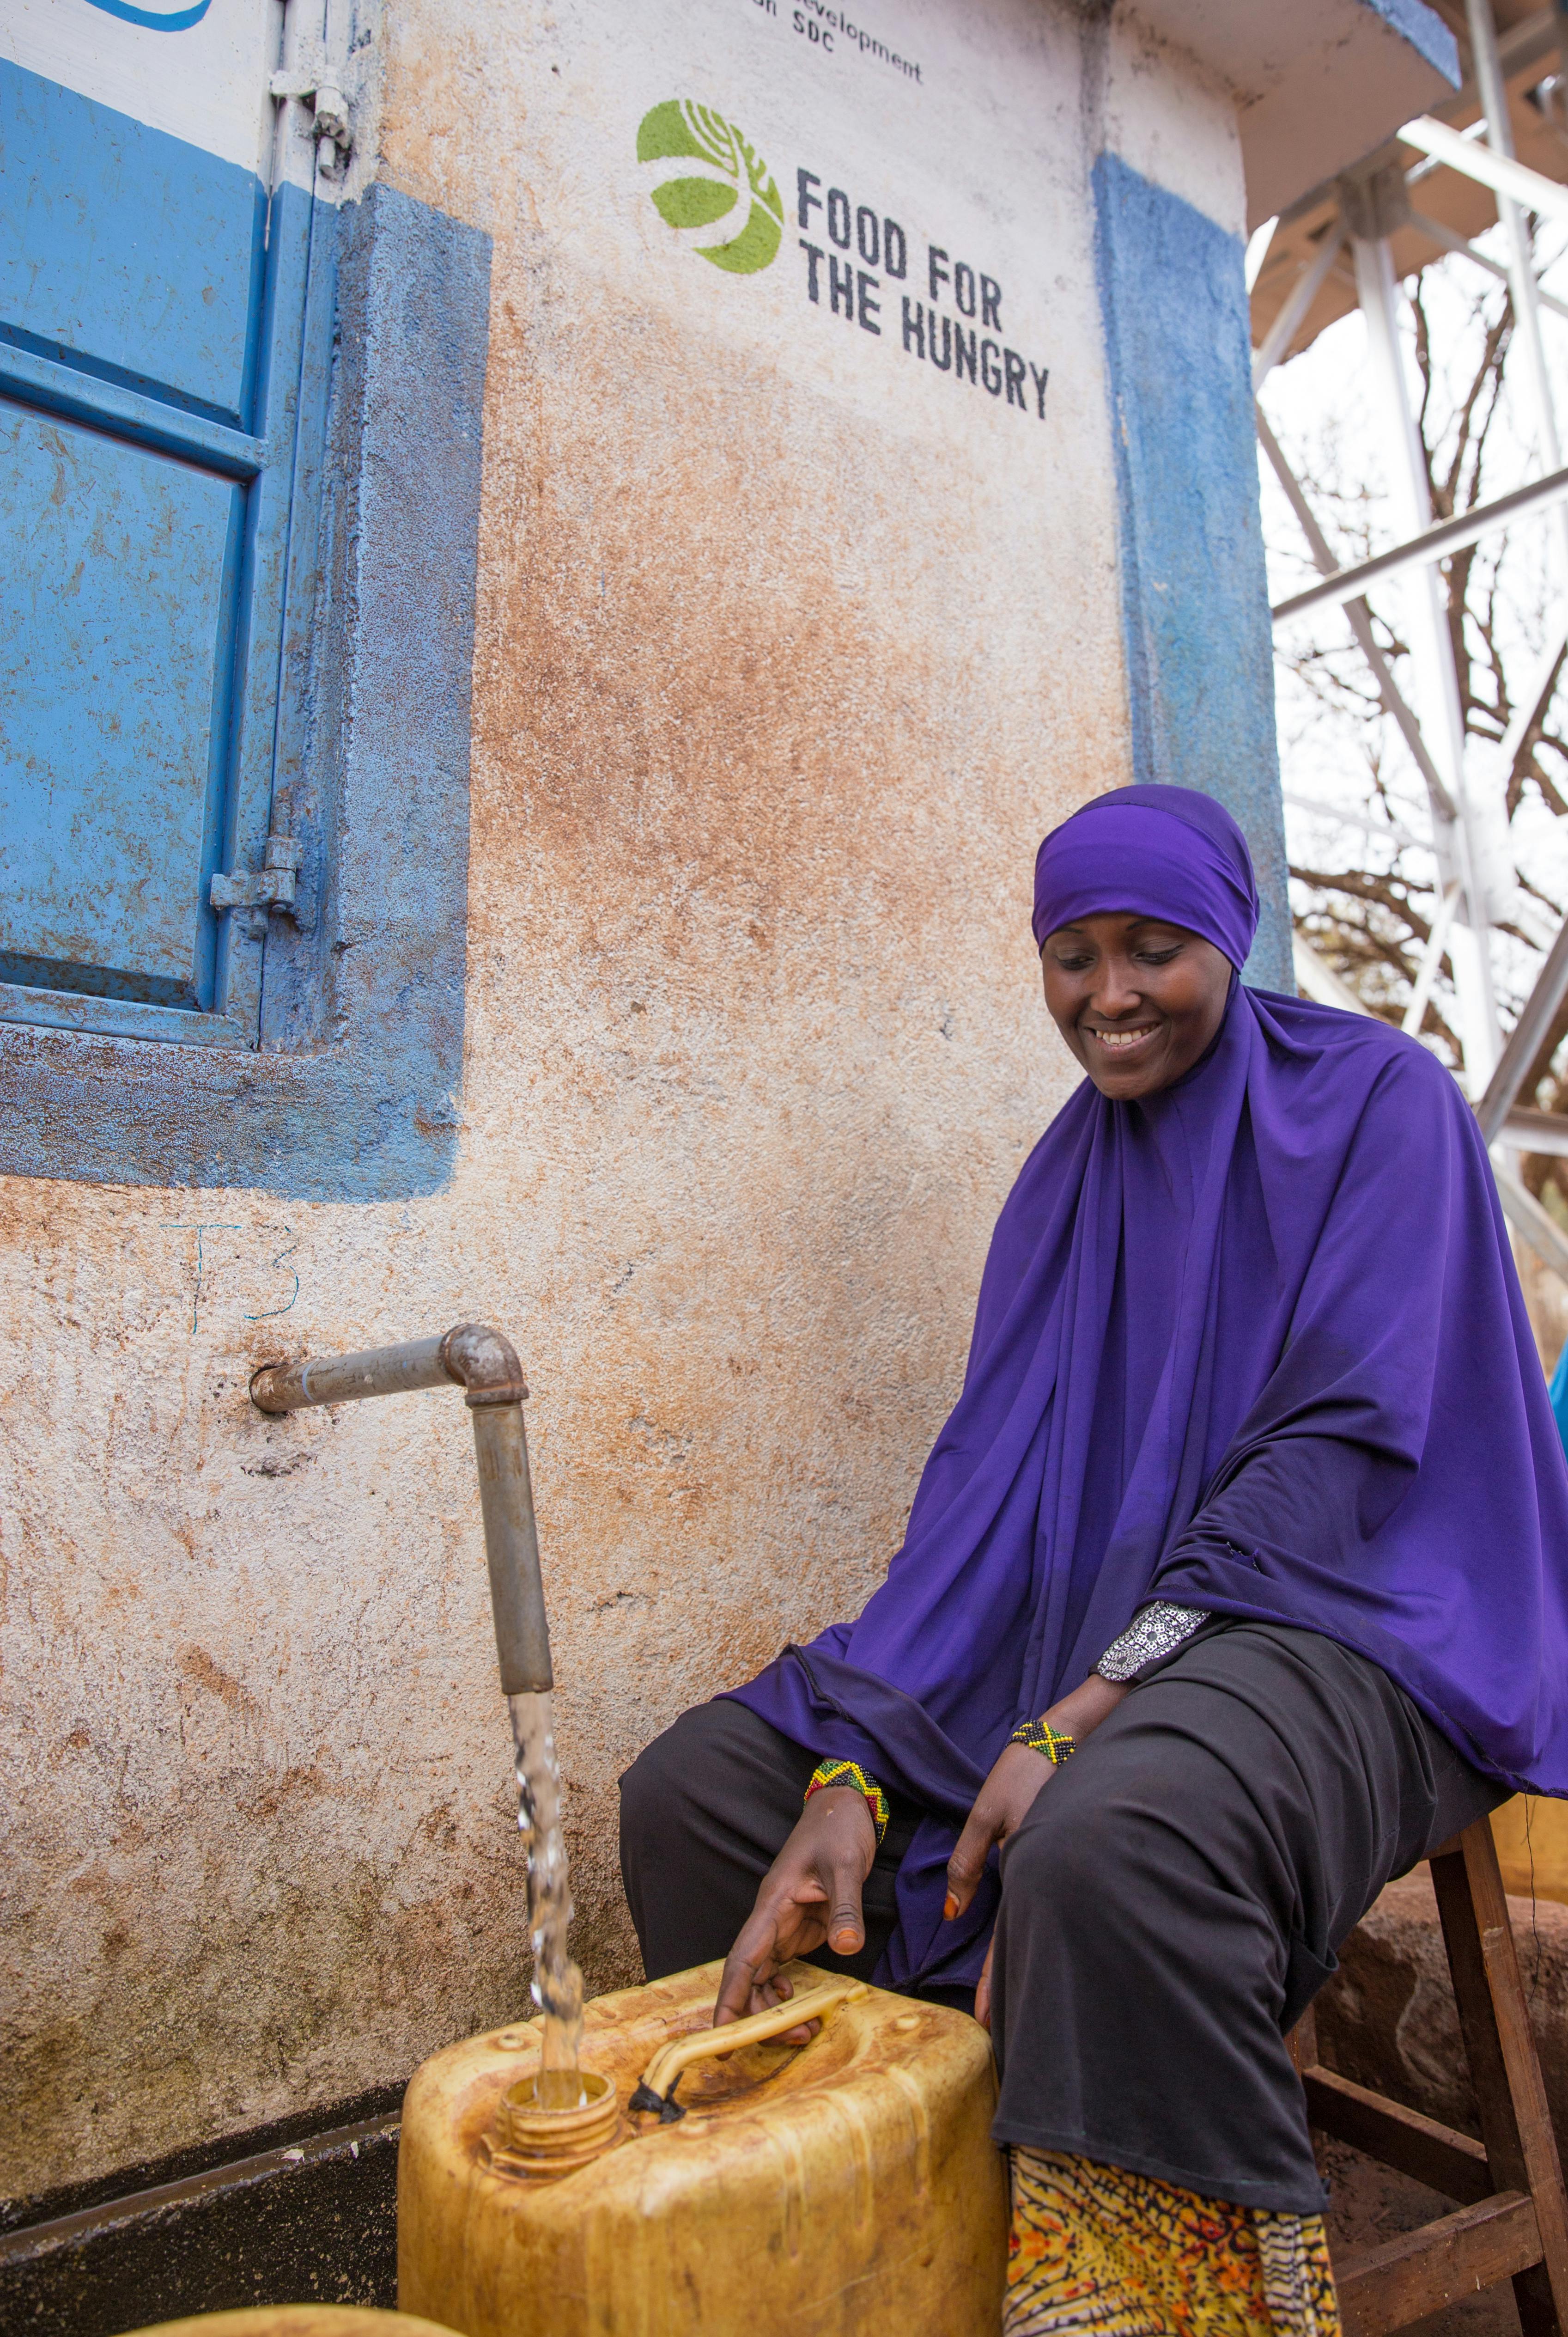 Kenyan woman in purple clothing gathers clean water from kiosk